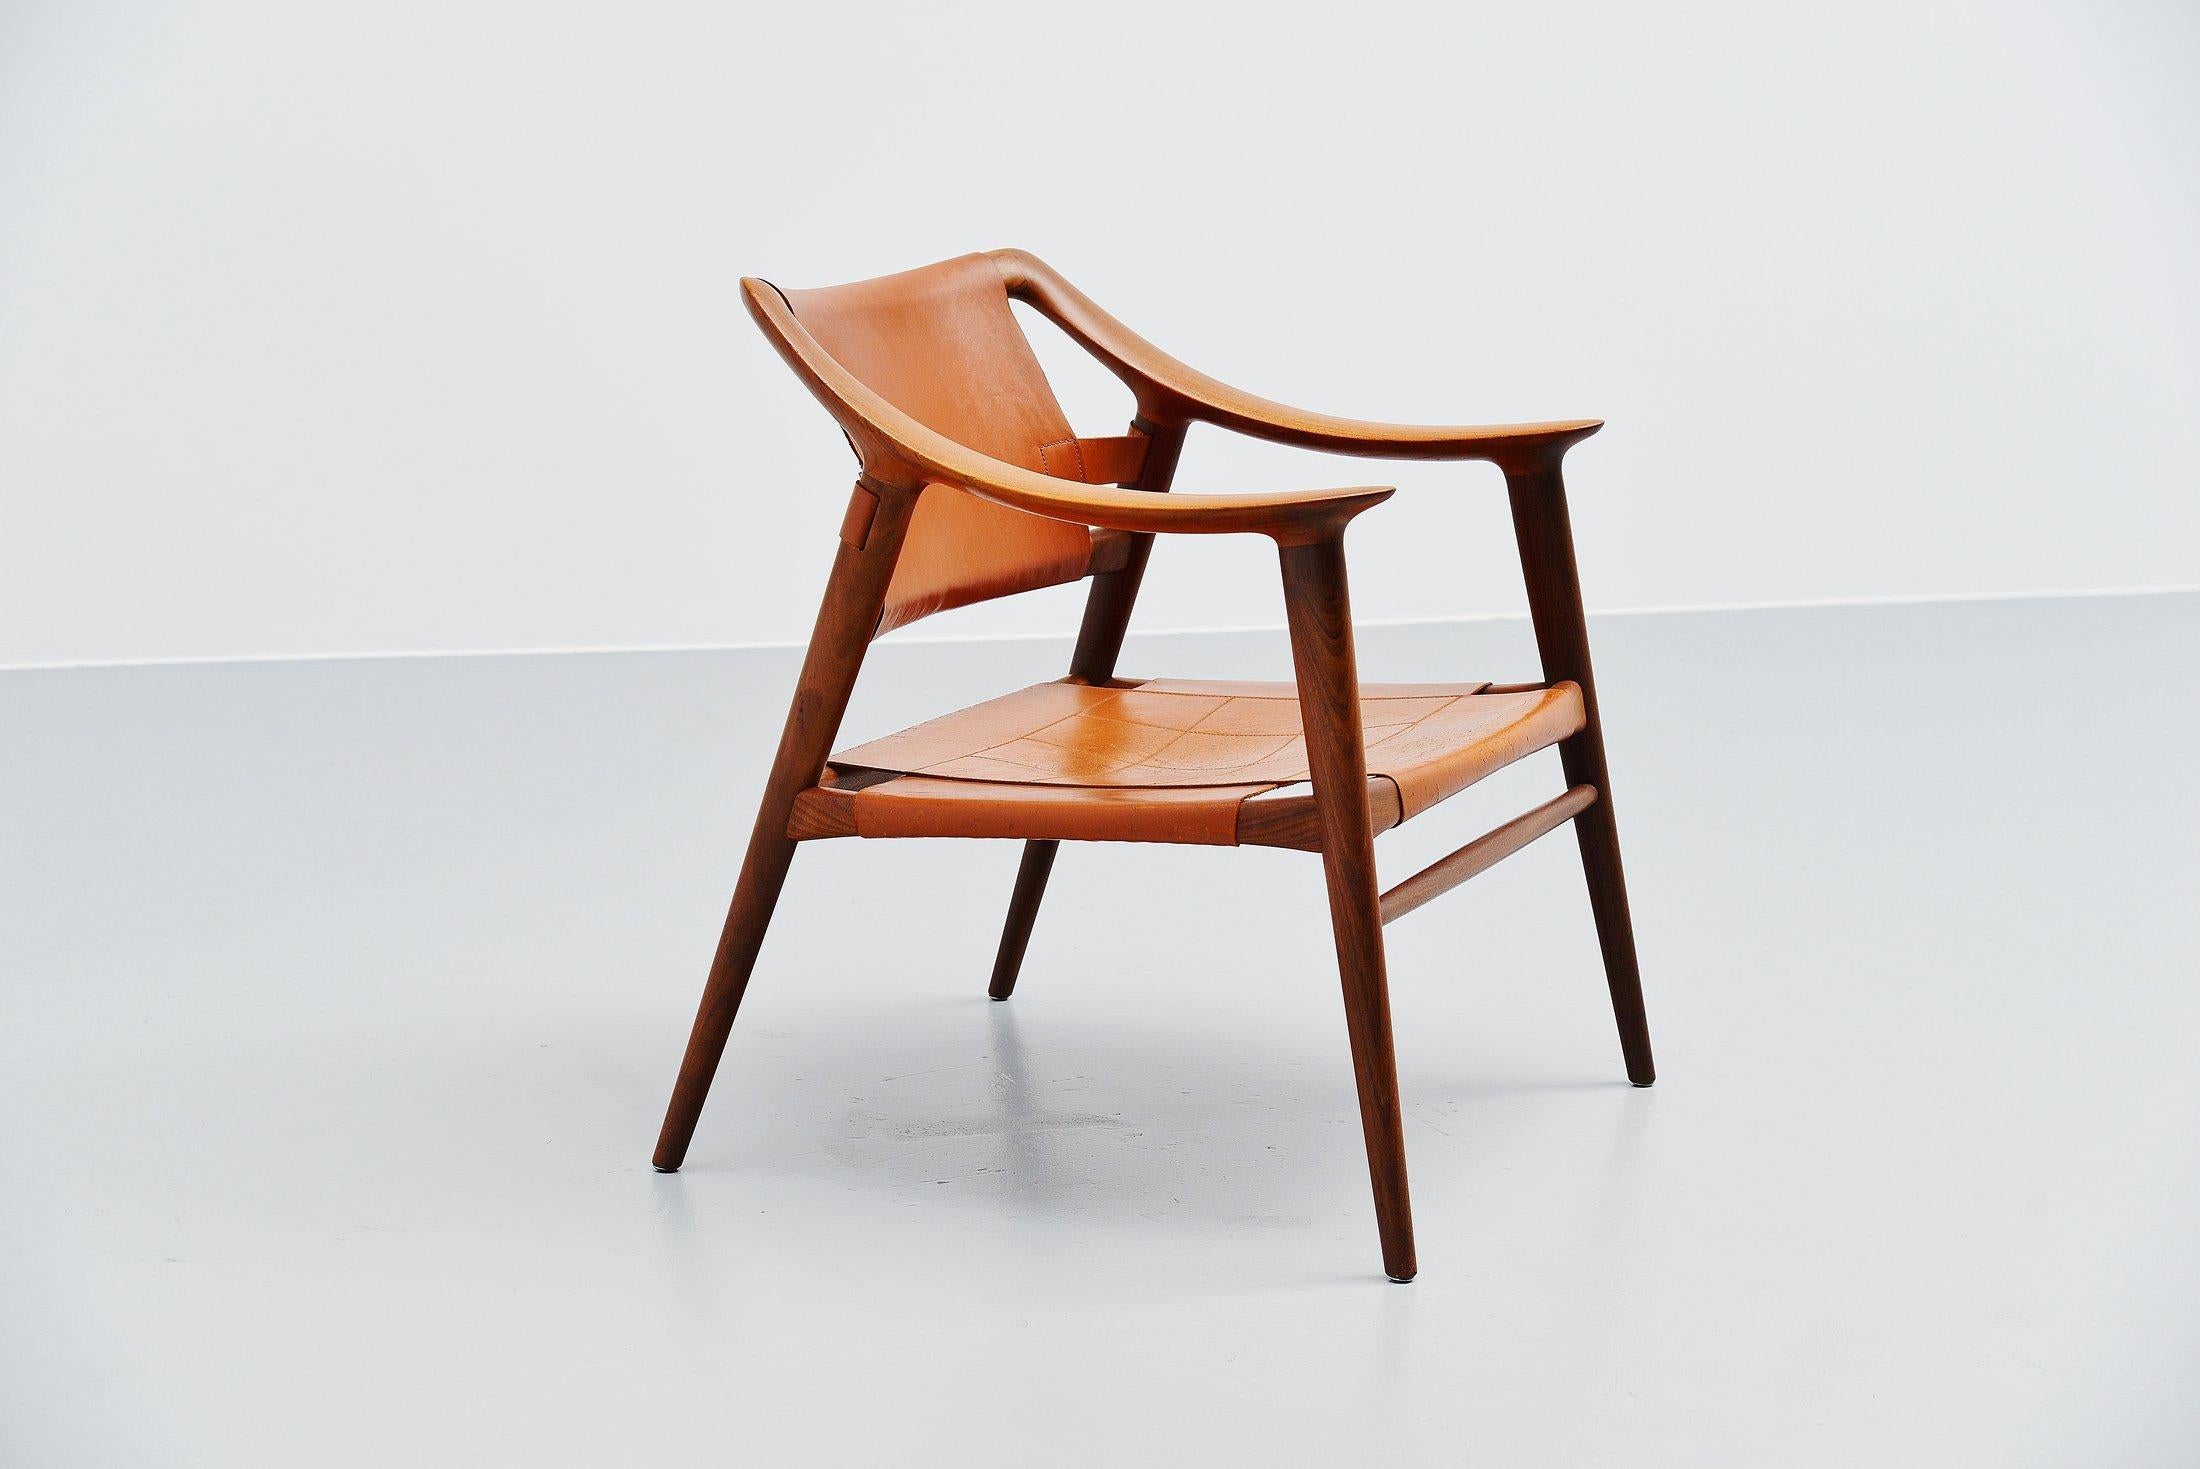 Stunning sculptural lounge chair designed by Rastad and Relling and manufactured by Gustav Bahus & Eft, Norway, 1954. Very nicely shaped lounge chair so called ‘Bambi’. The chair is made of solid teak wood and has a very nice cognac leather stitched